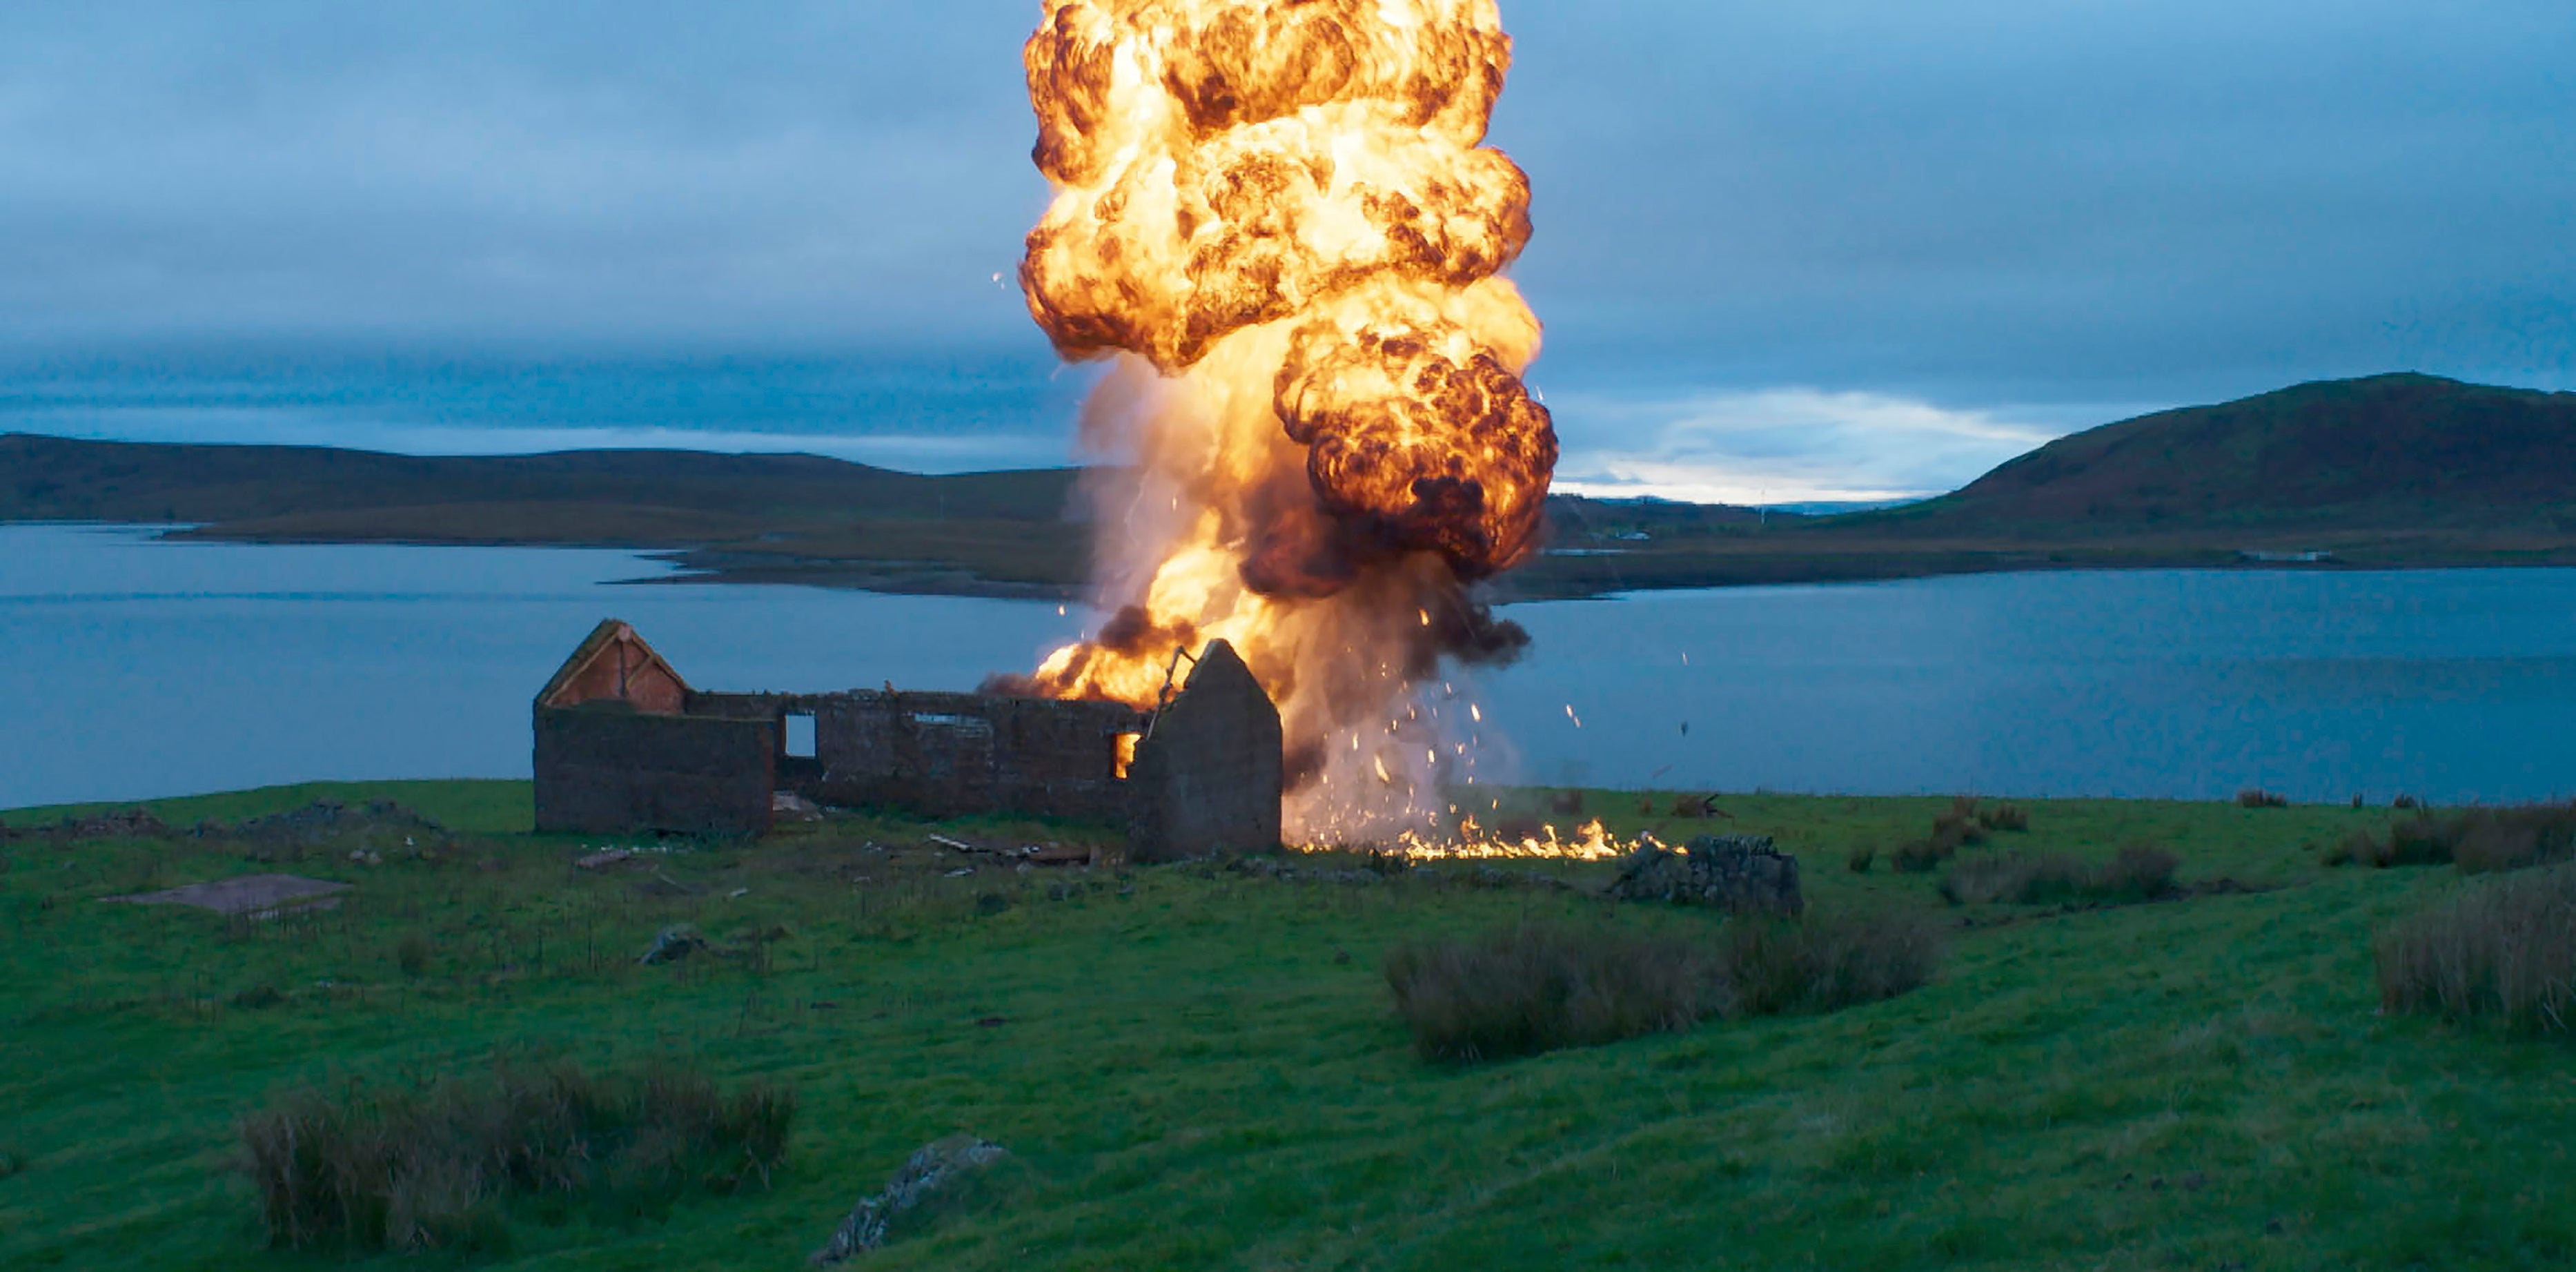 Wednesday evening’s episode of Shetland saw Tosh caught in a potentially fatal explosion (ITV Studios/BBC/PA)